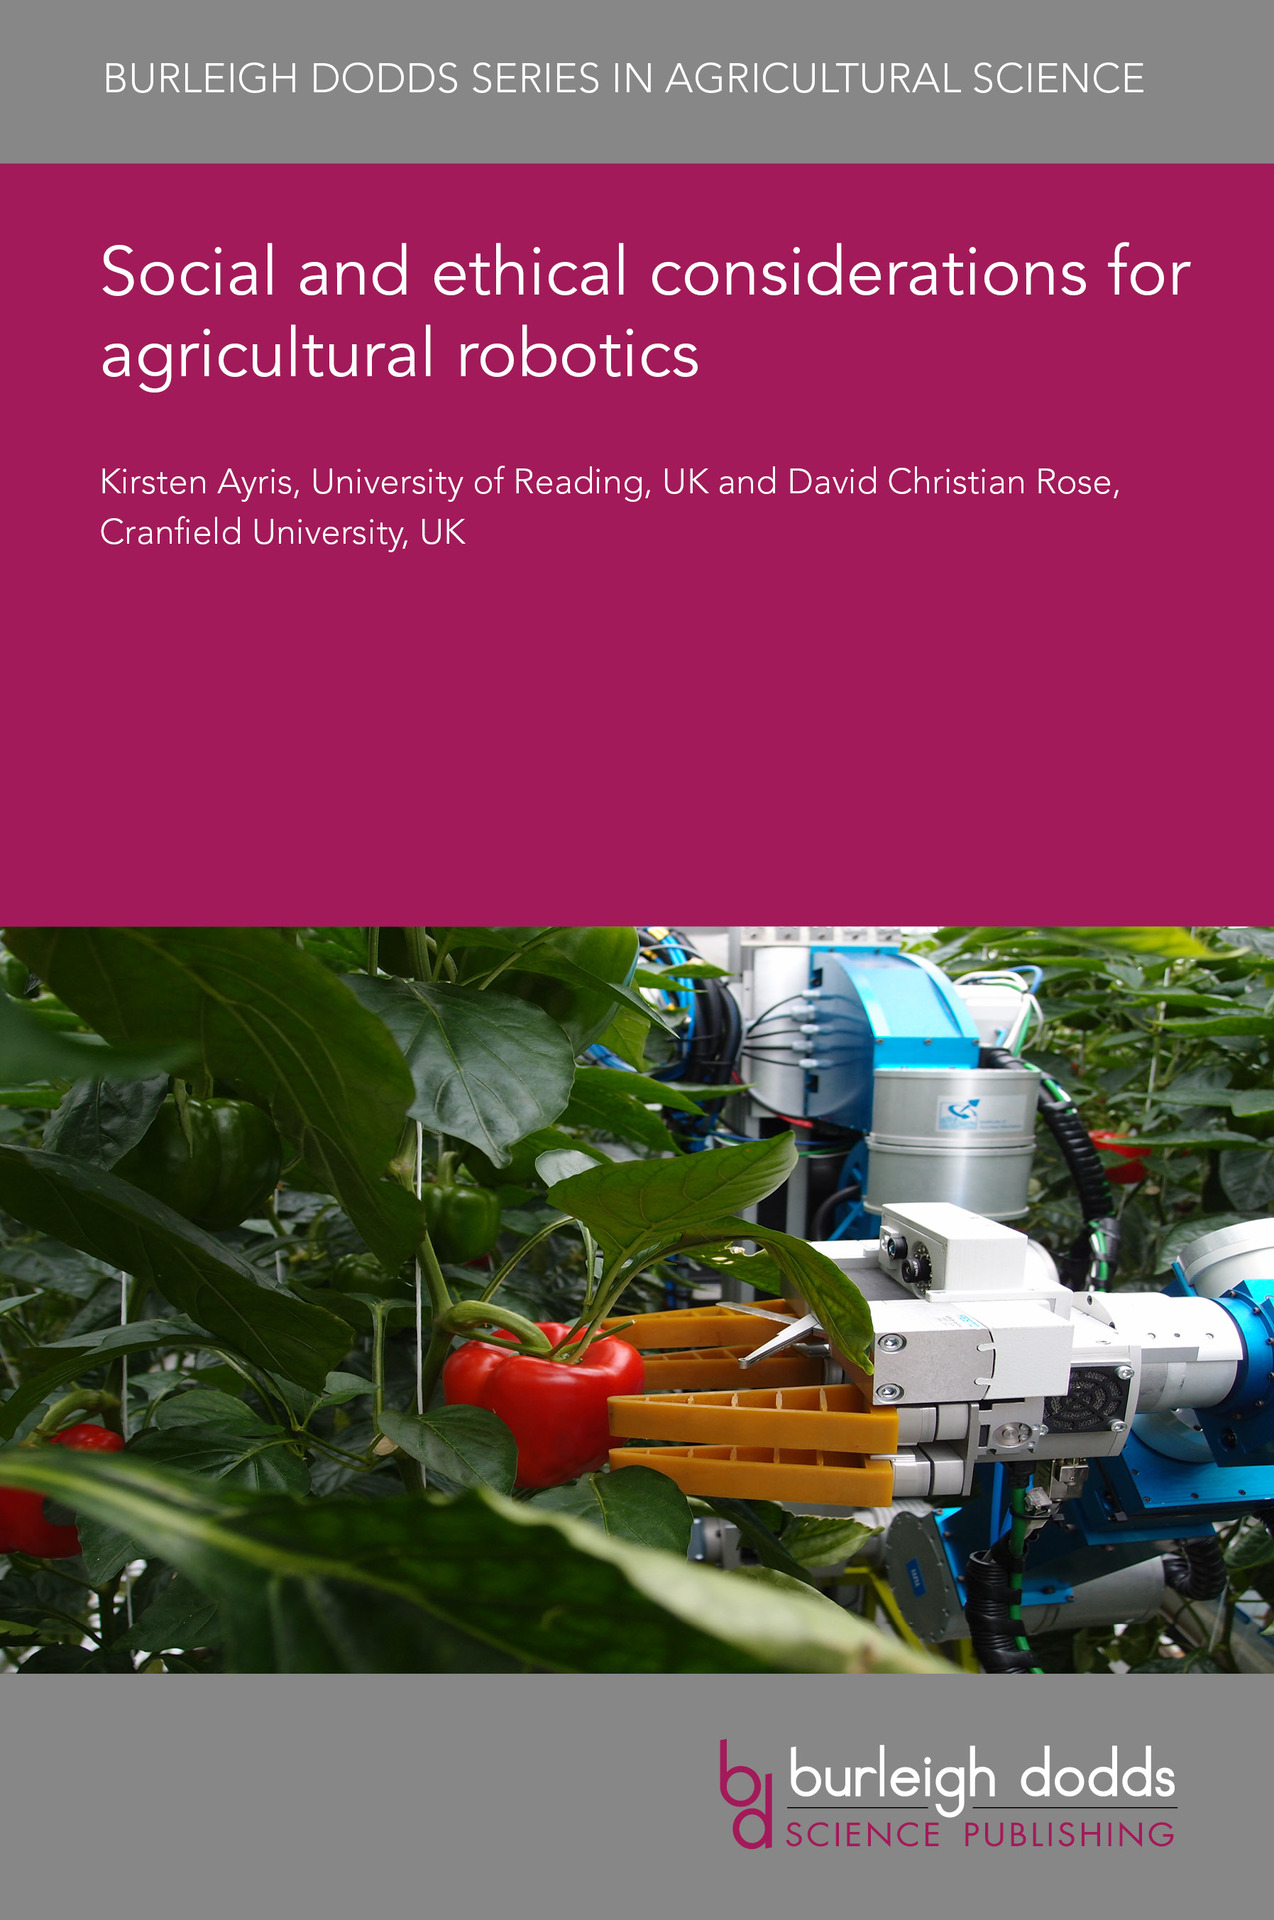 Social and ethical considerations for agricultural robotics